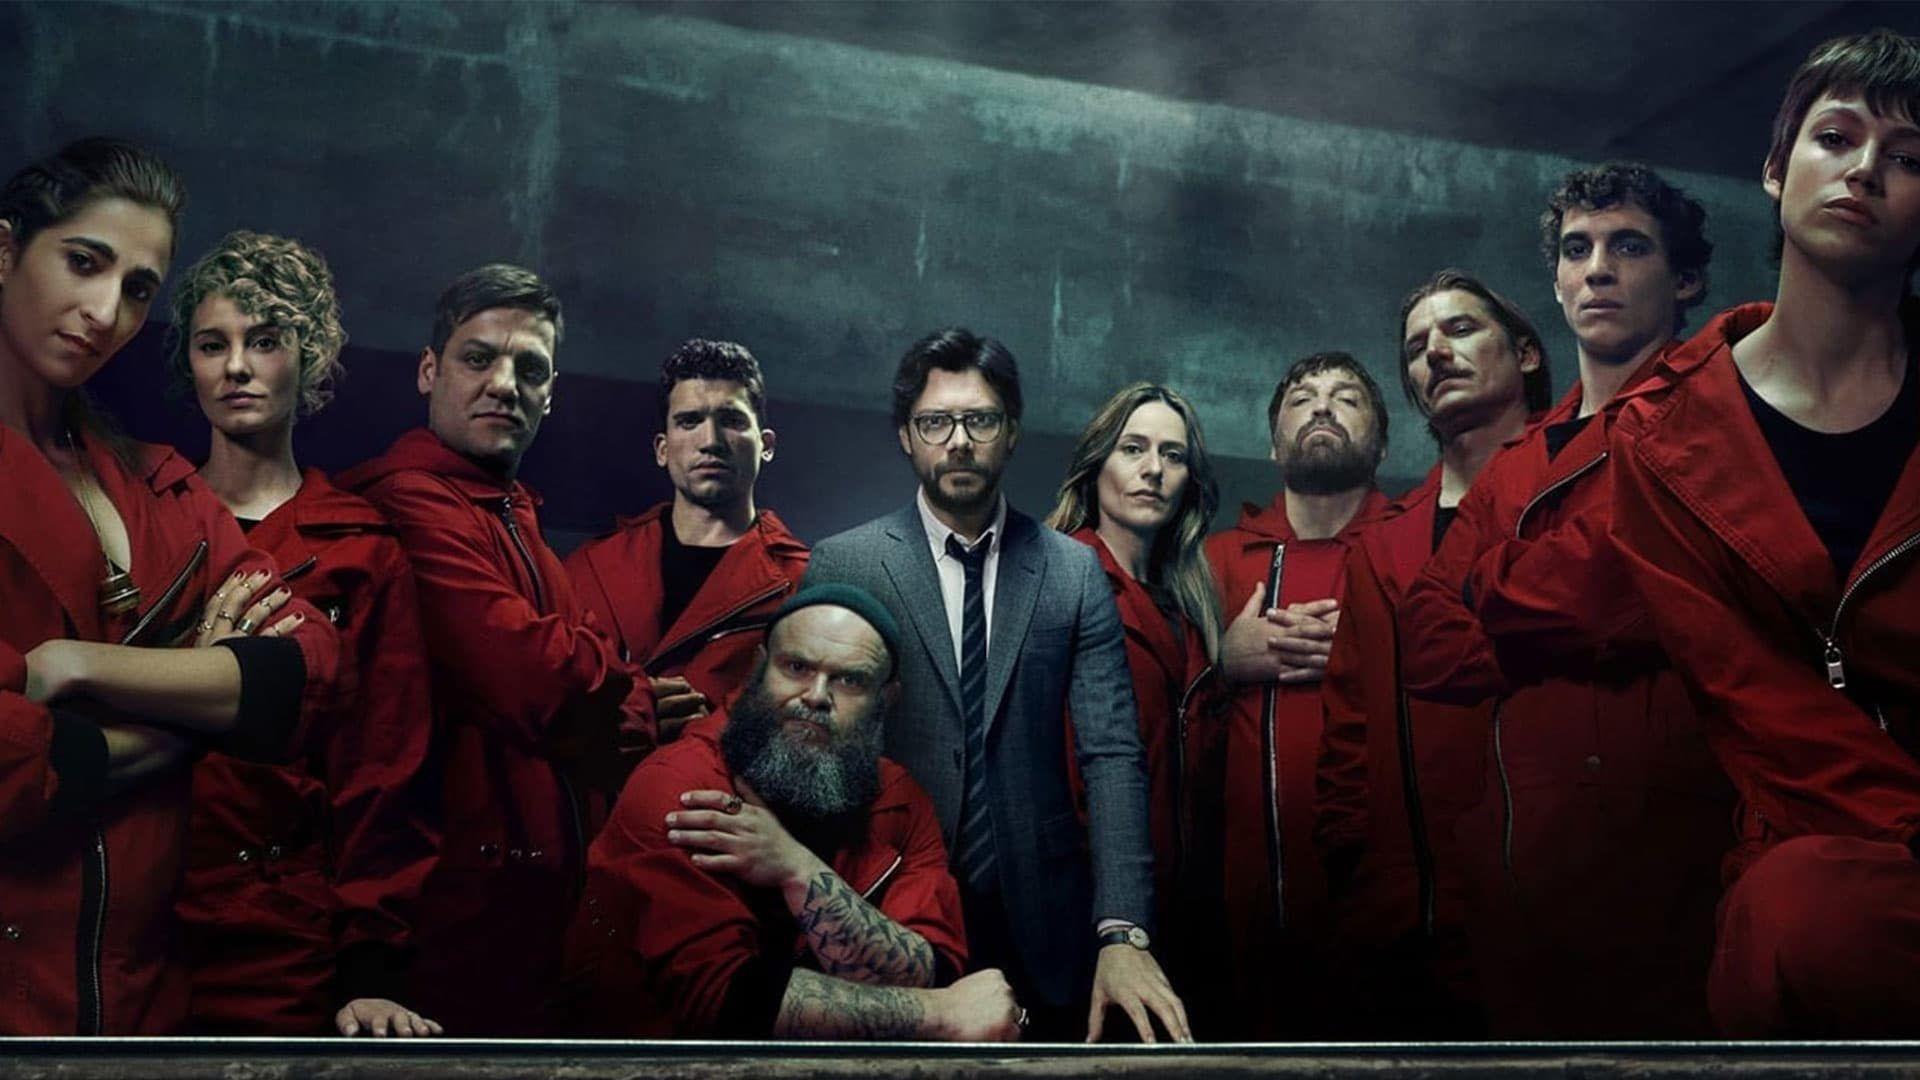 Money heist season 1 1080p free download torrent dental management of the medically compromised patient pdf free download